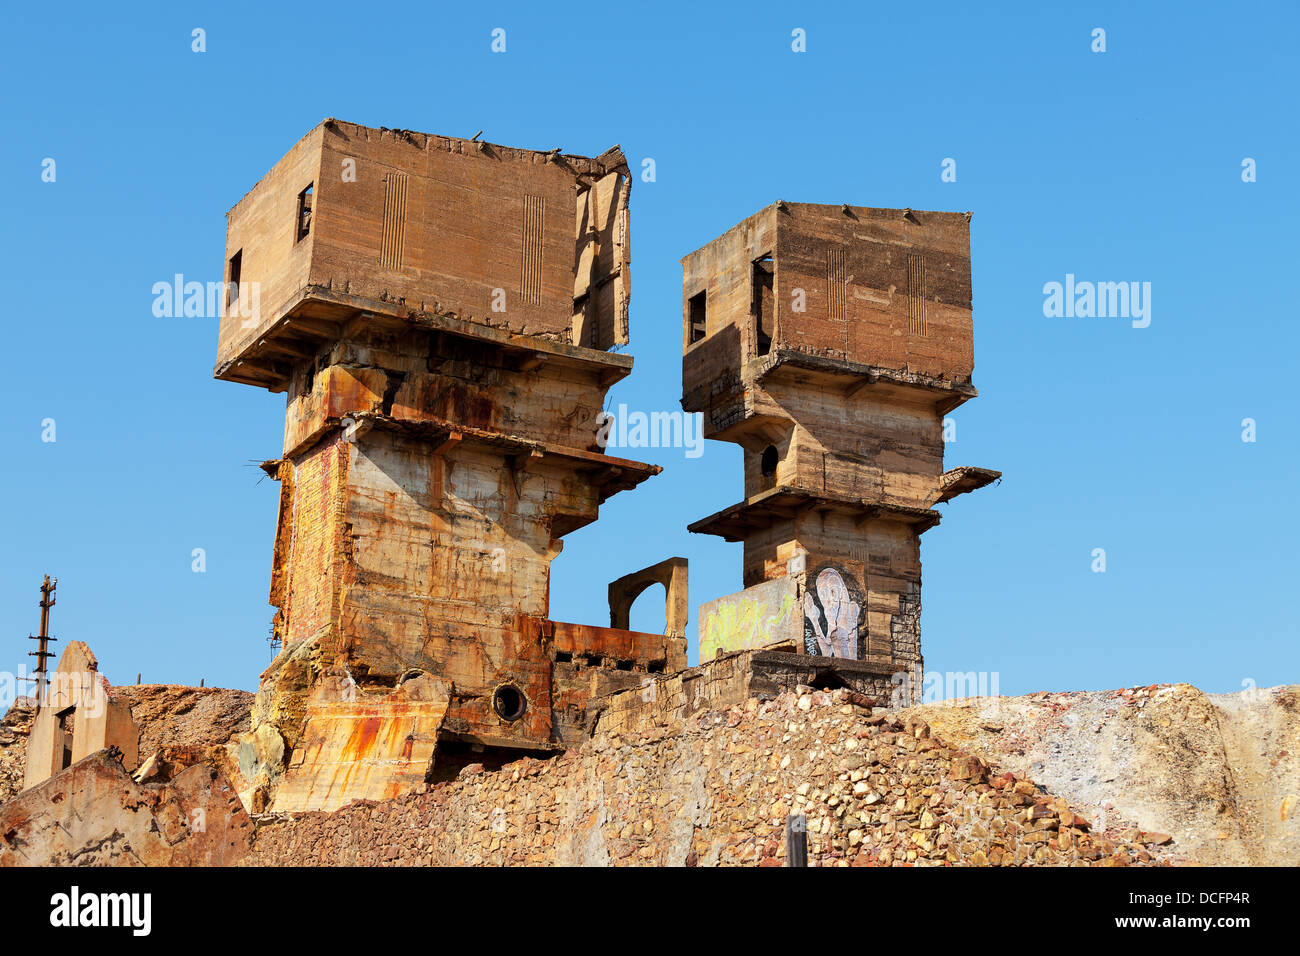 Abandoned copper mine with old stone buildings Stock Photo